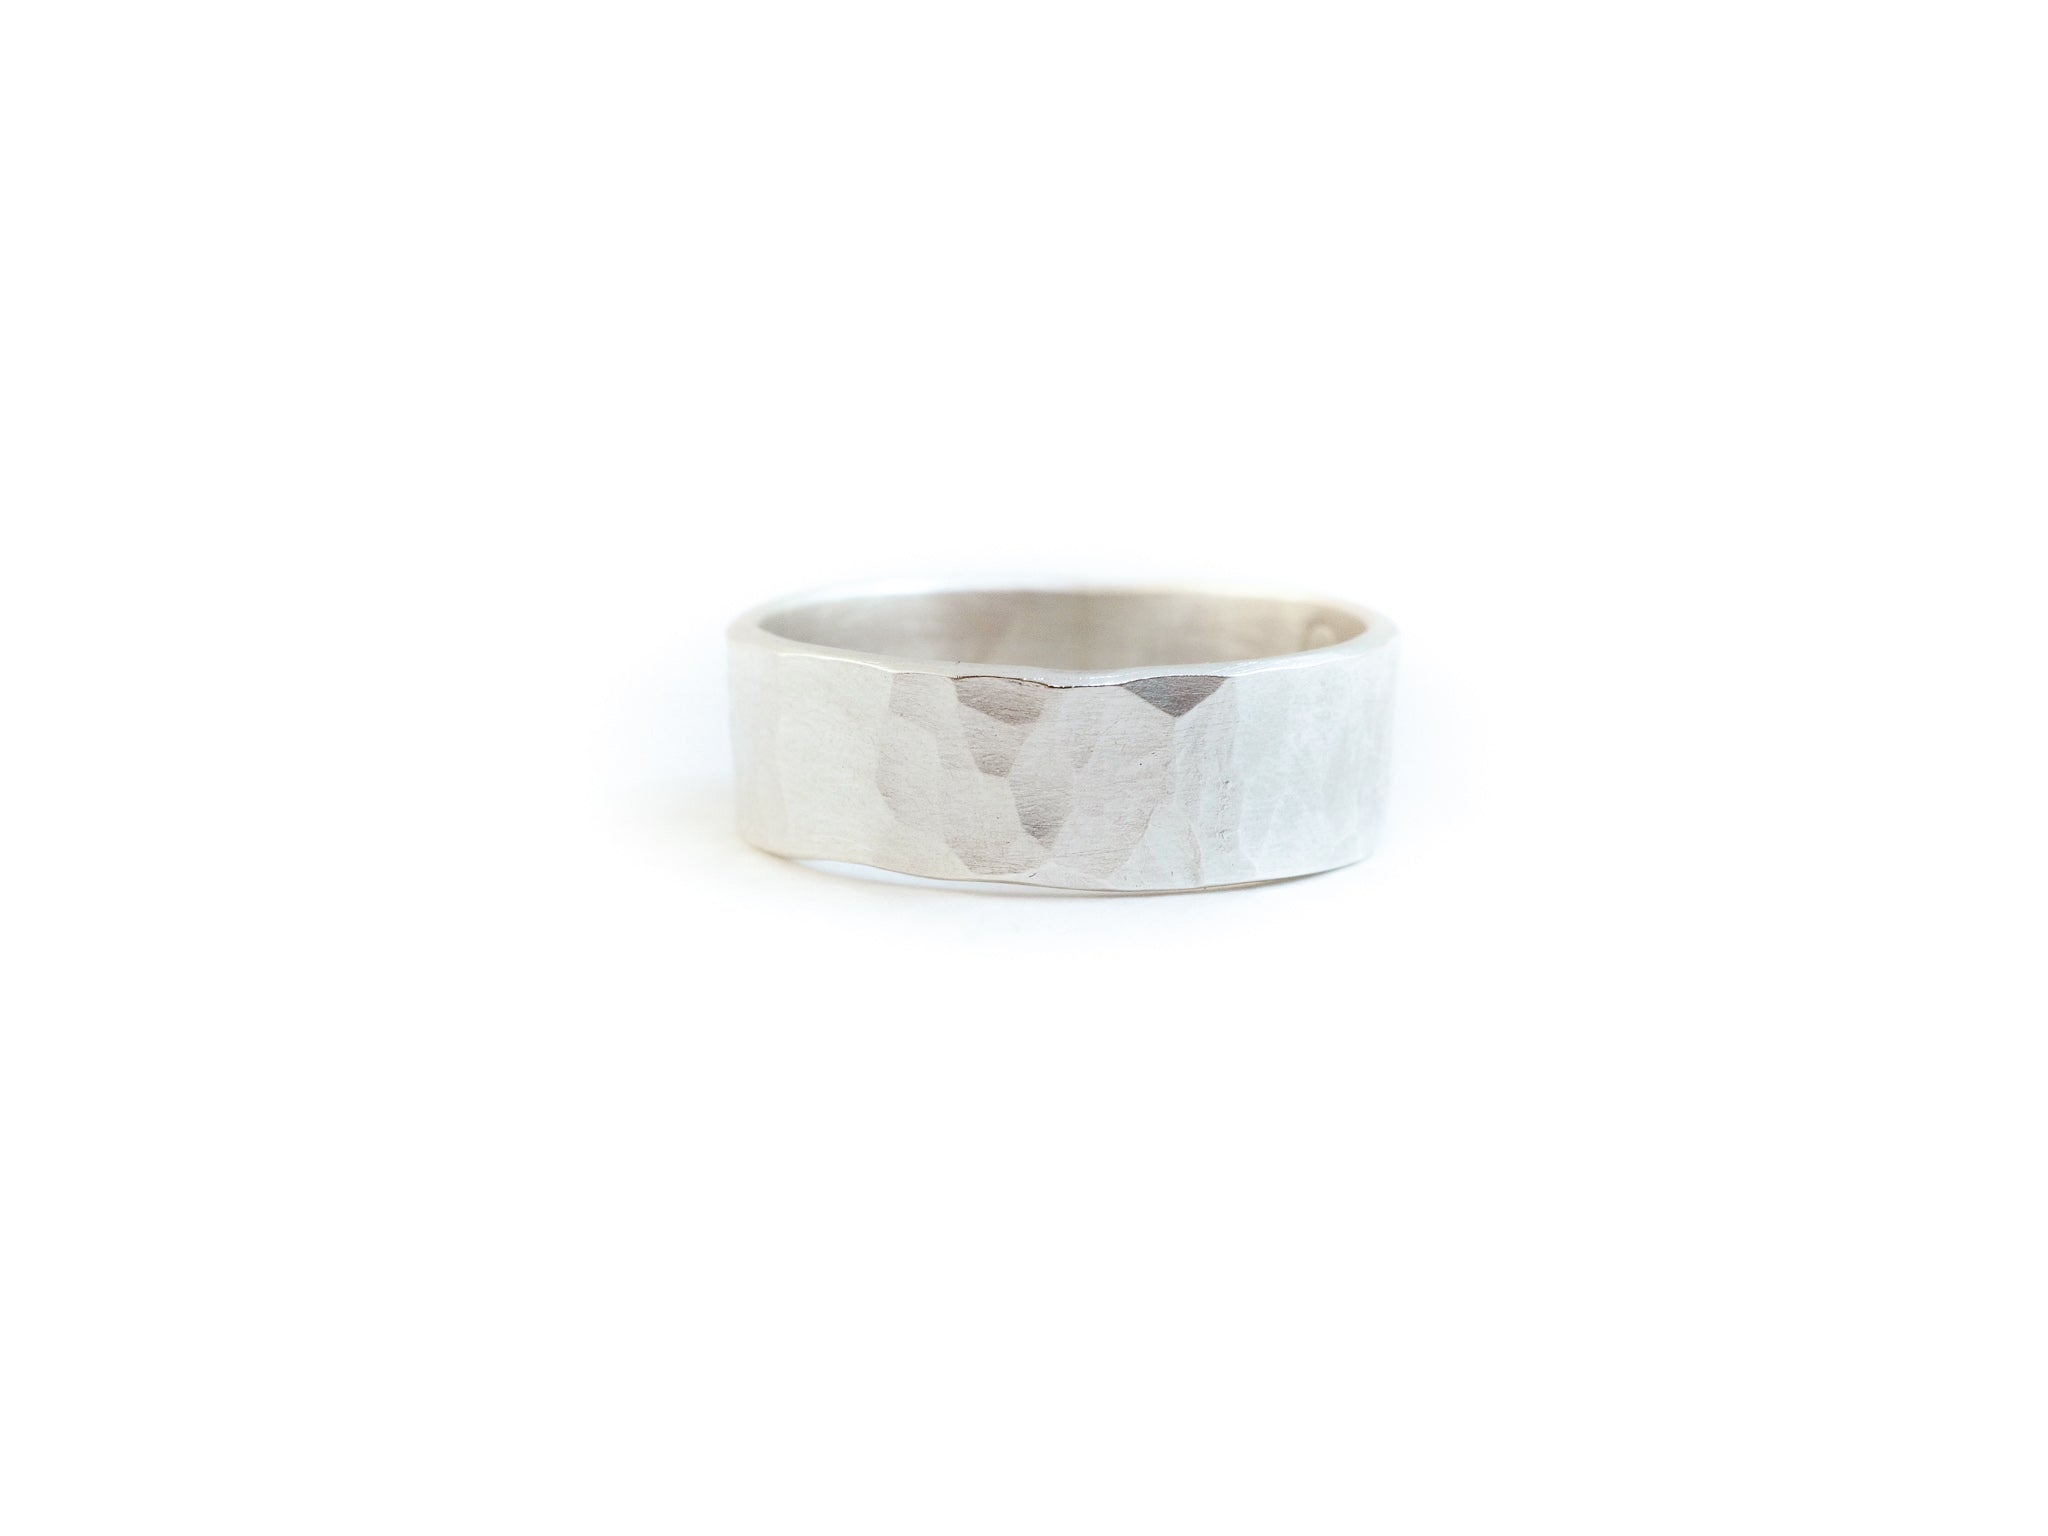 Men's jewellery sterling silver hammered band hand made in tofino